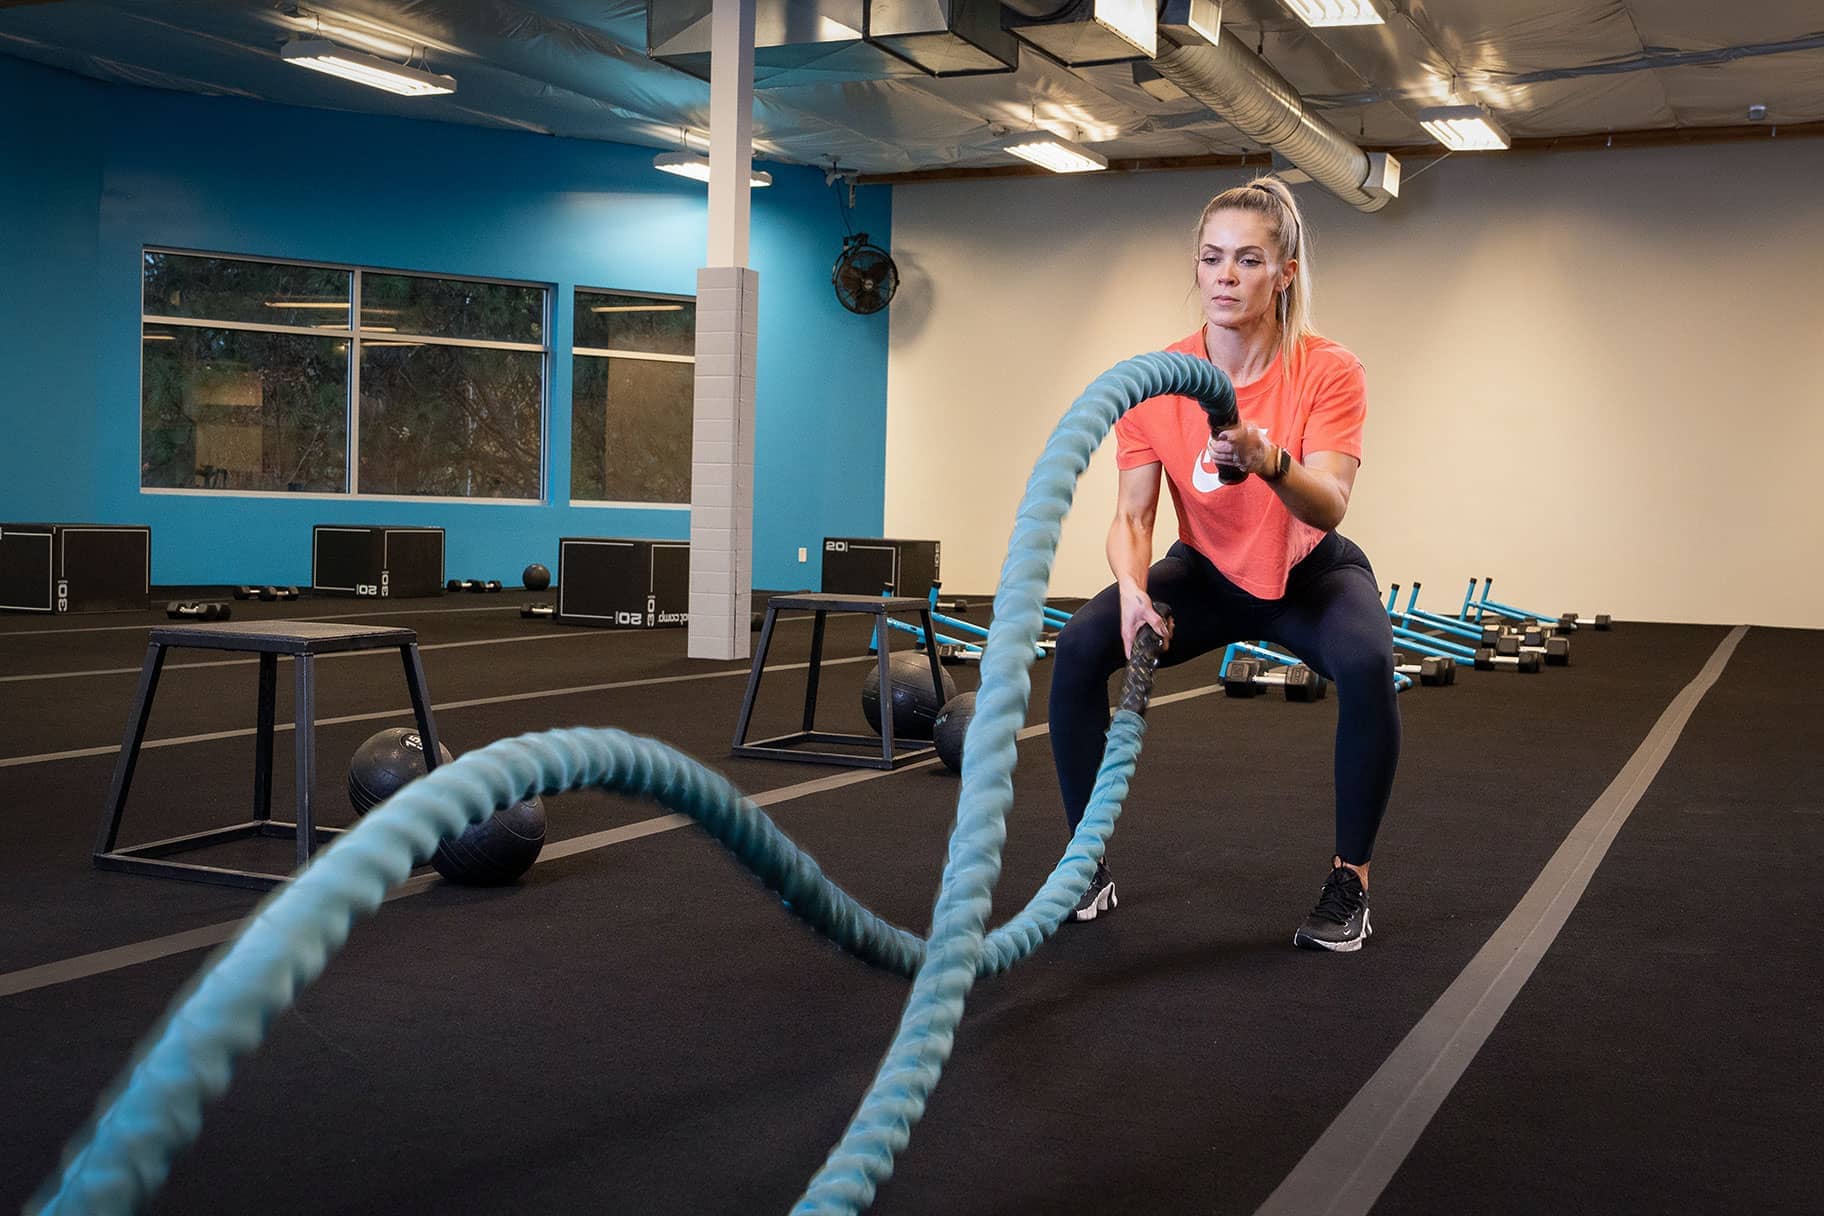 Battle ropes workout: 7 easy battle rope exercises for beginners